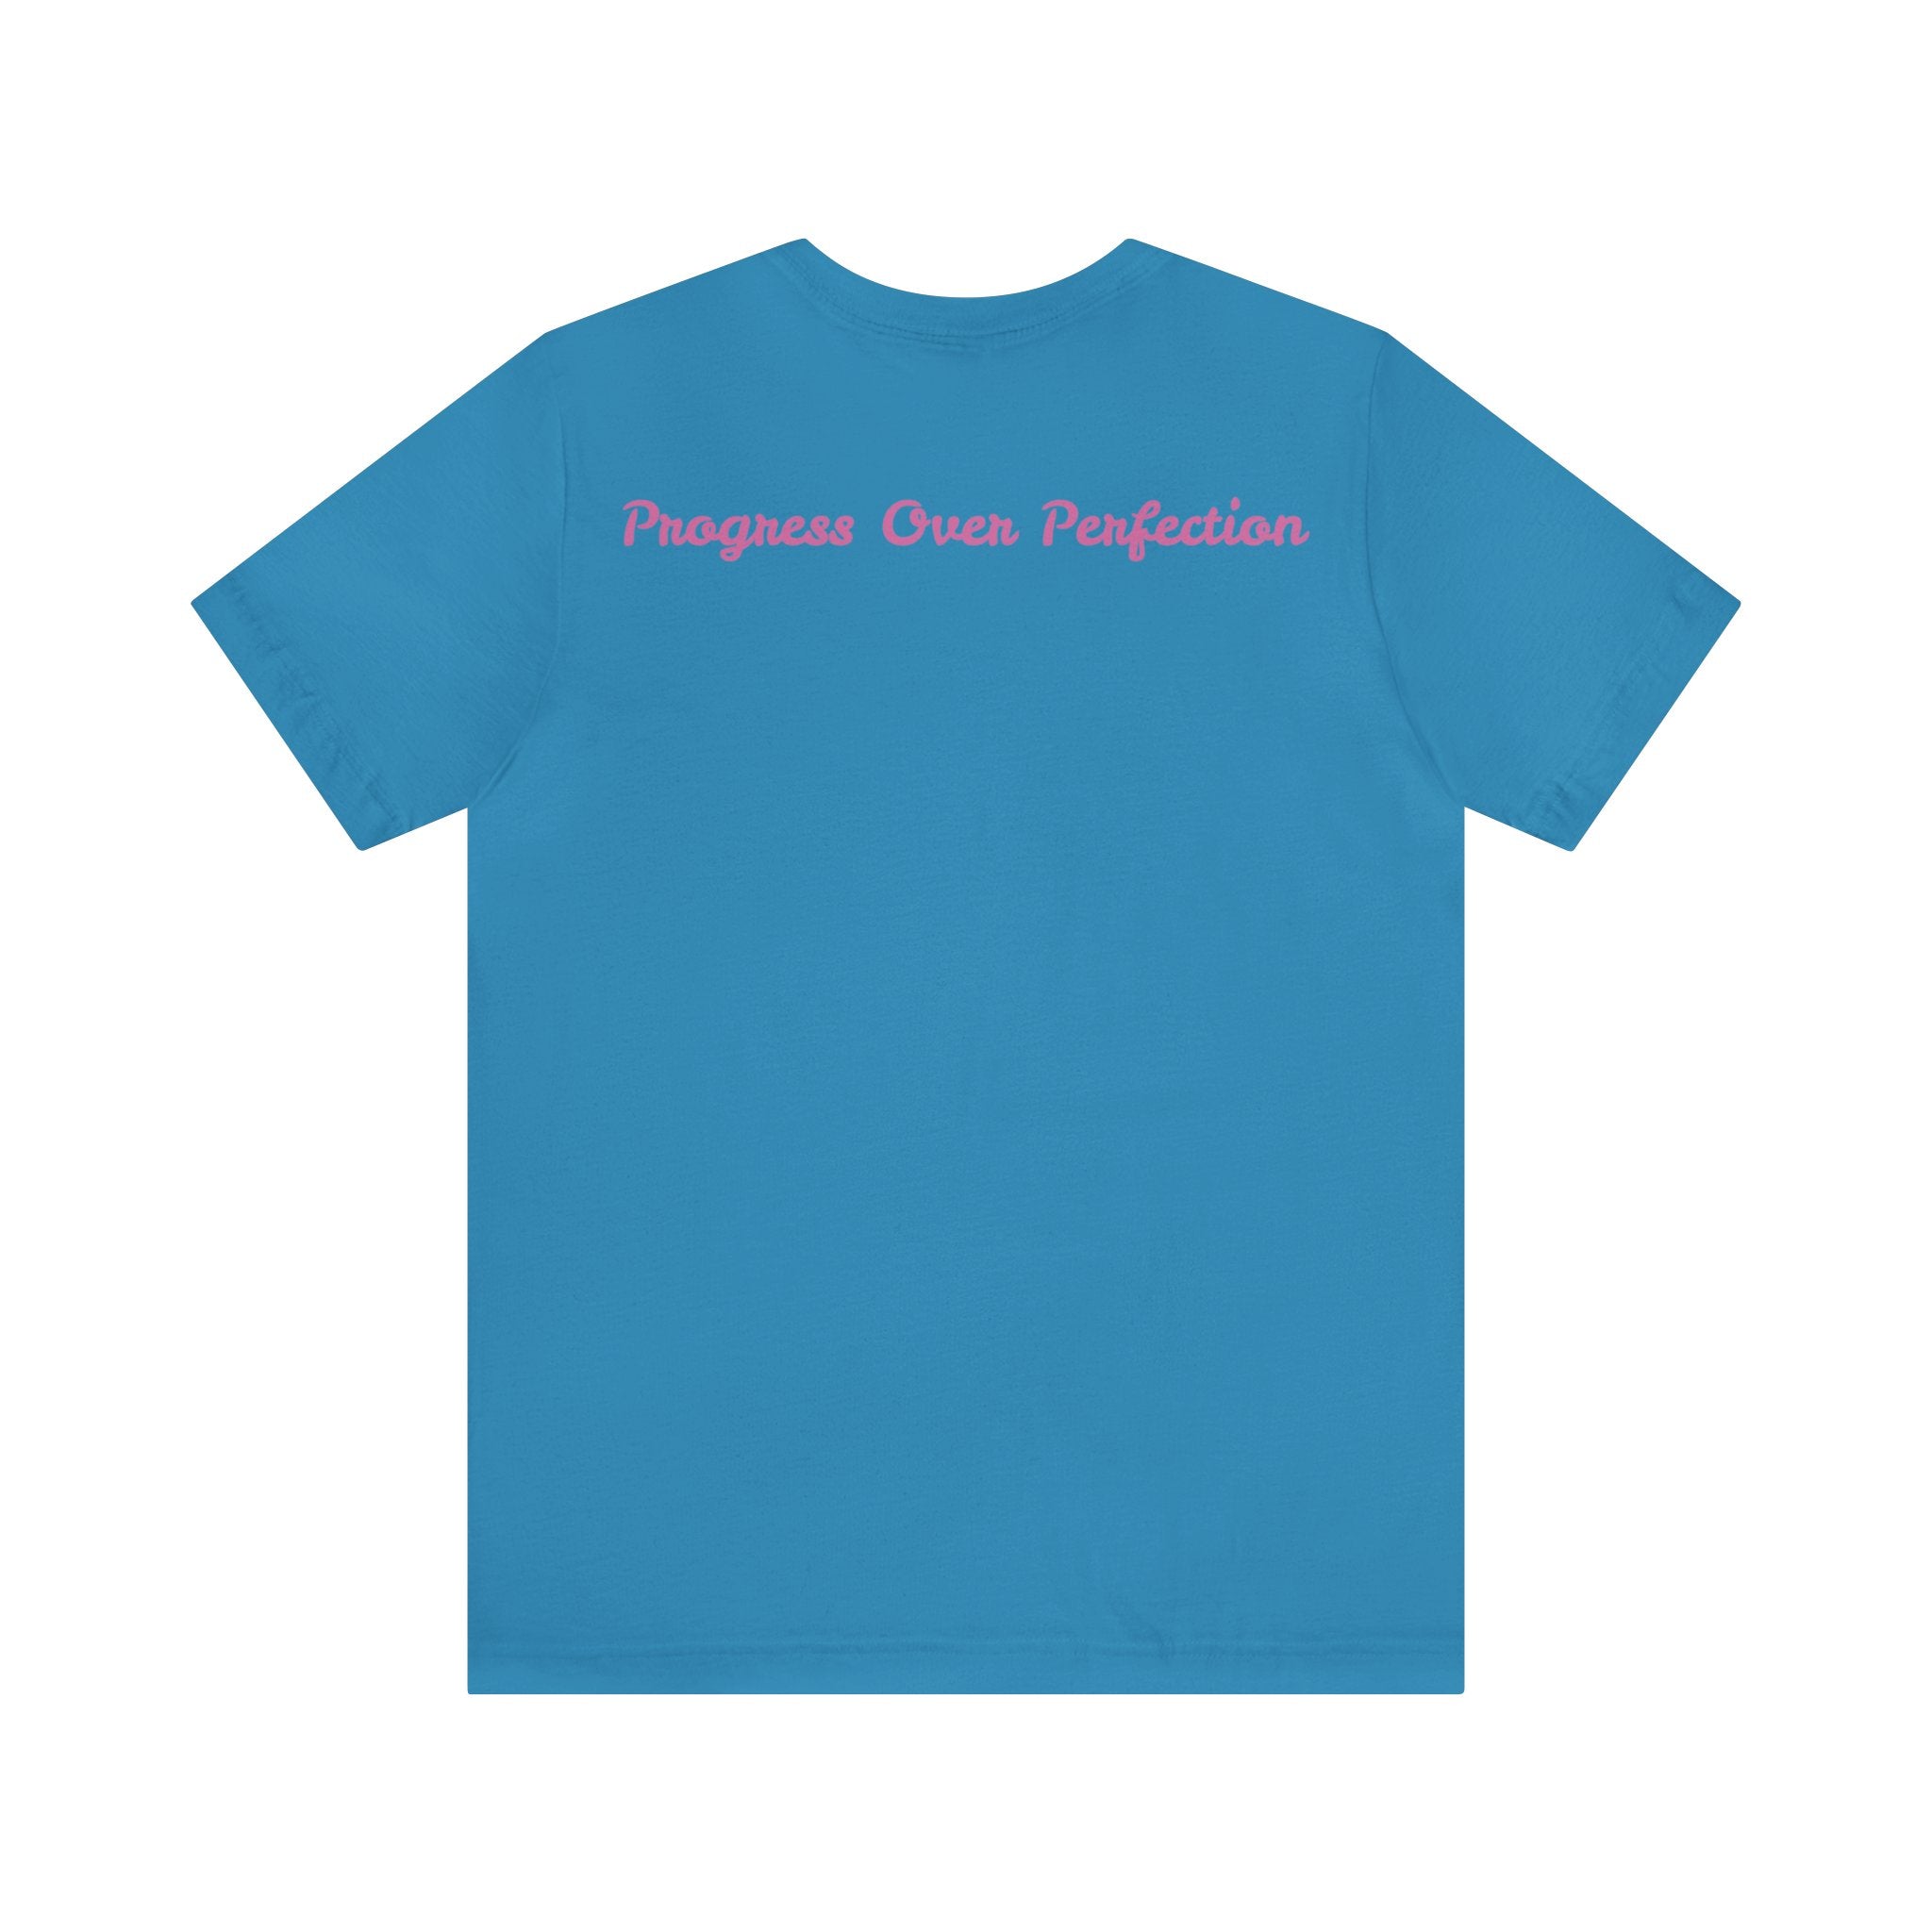 Progress Over Perfection Tee - Bella+Canvas 3001 Yellow Airlume Cotton Bella+Canvas 3001 Crew Neckline Jersey Short Sleeve Lightweight Fabric Mental Health Support Retail Fit Tear-away Label Tee Unisex Tee T-Shirt 15677004138639641450_2048 Printify